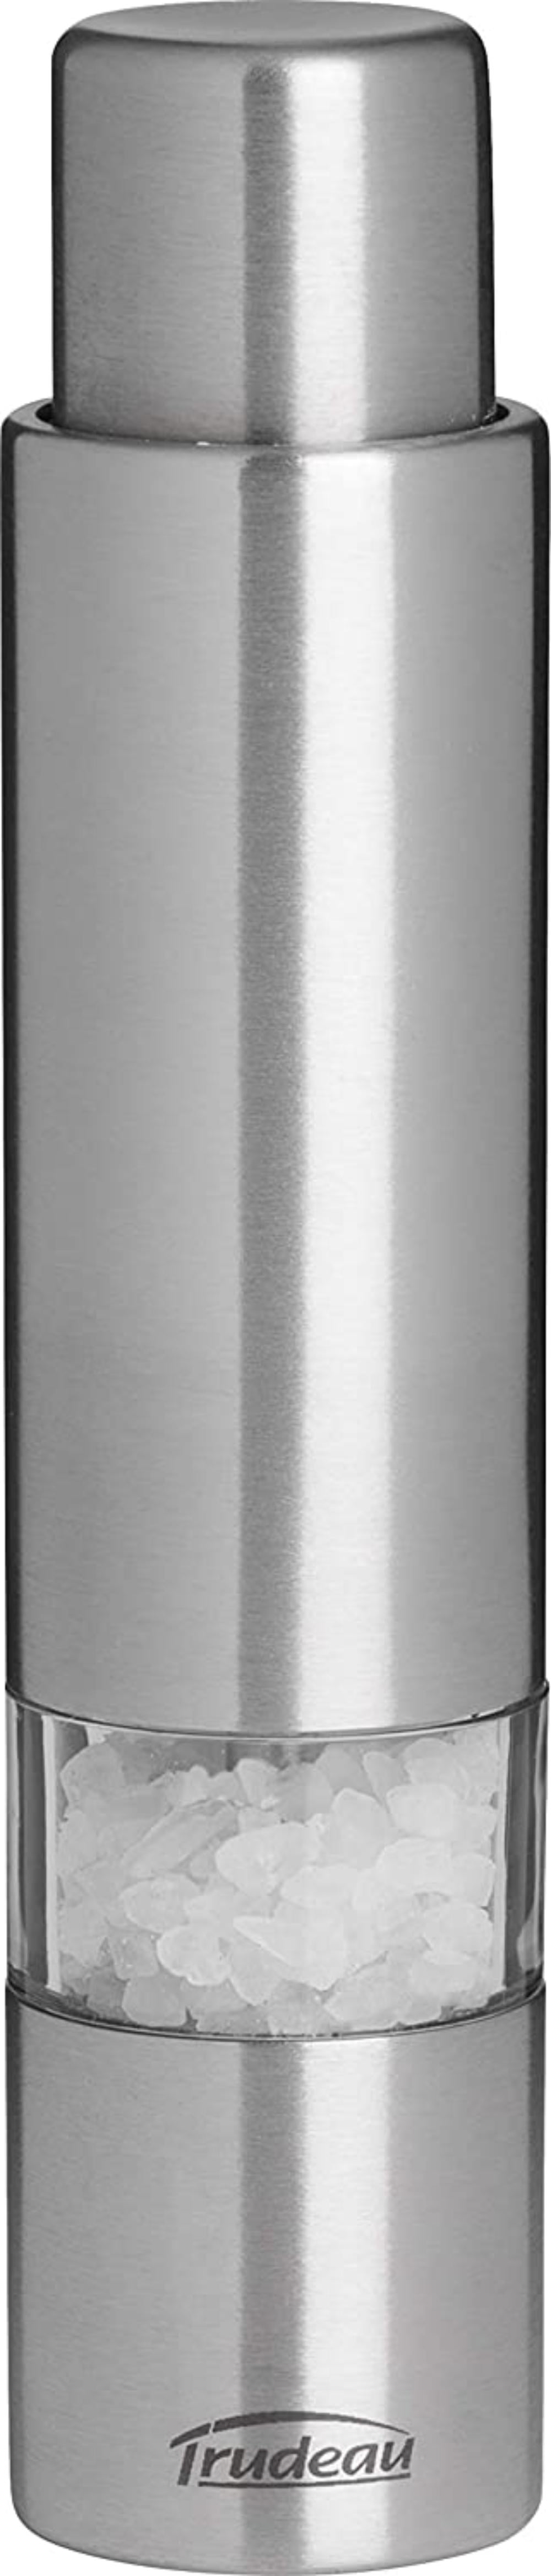 Silver Trudeau Stainless Steel 6 inch One-Hand Thumb Mill Salt Grinder 6